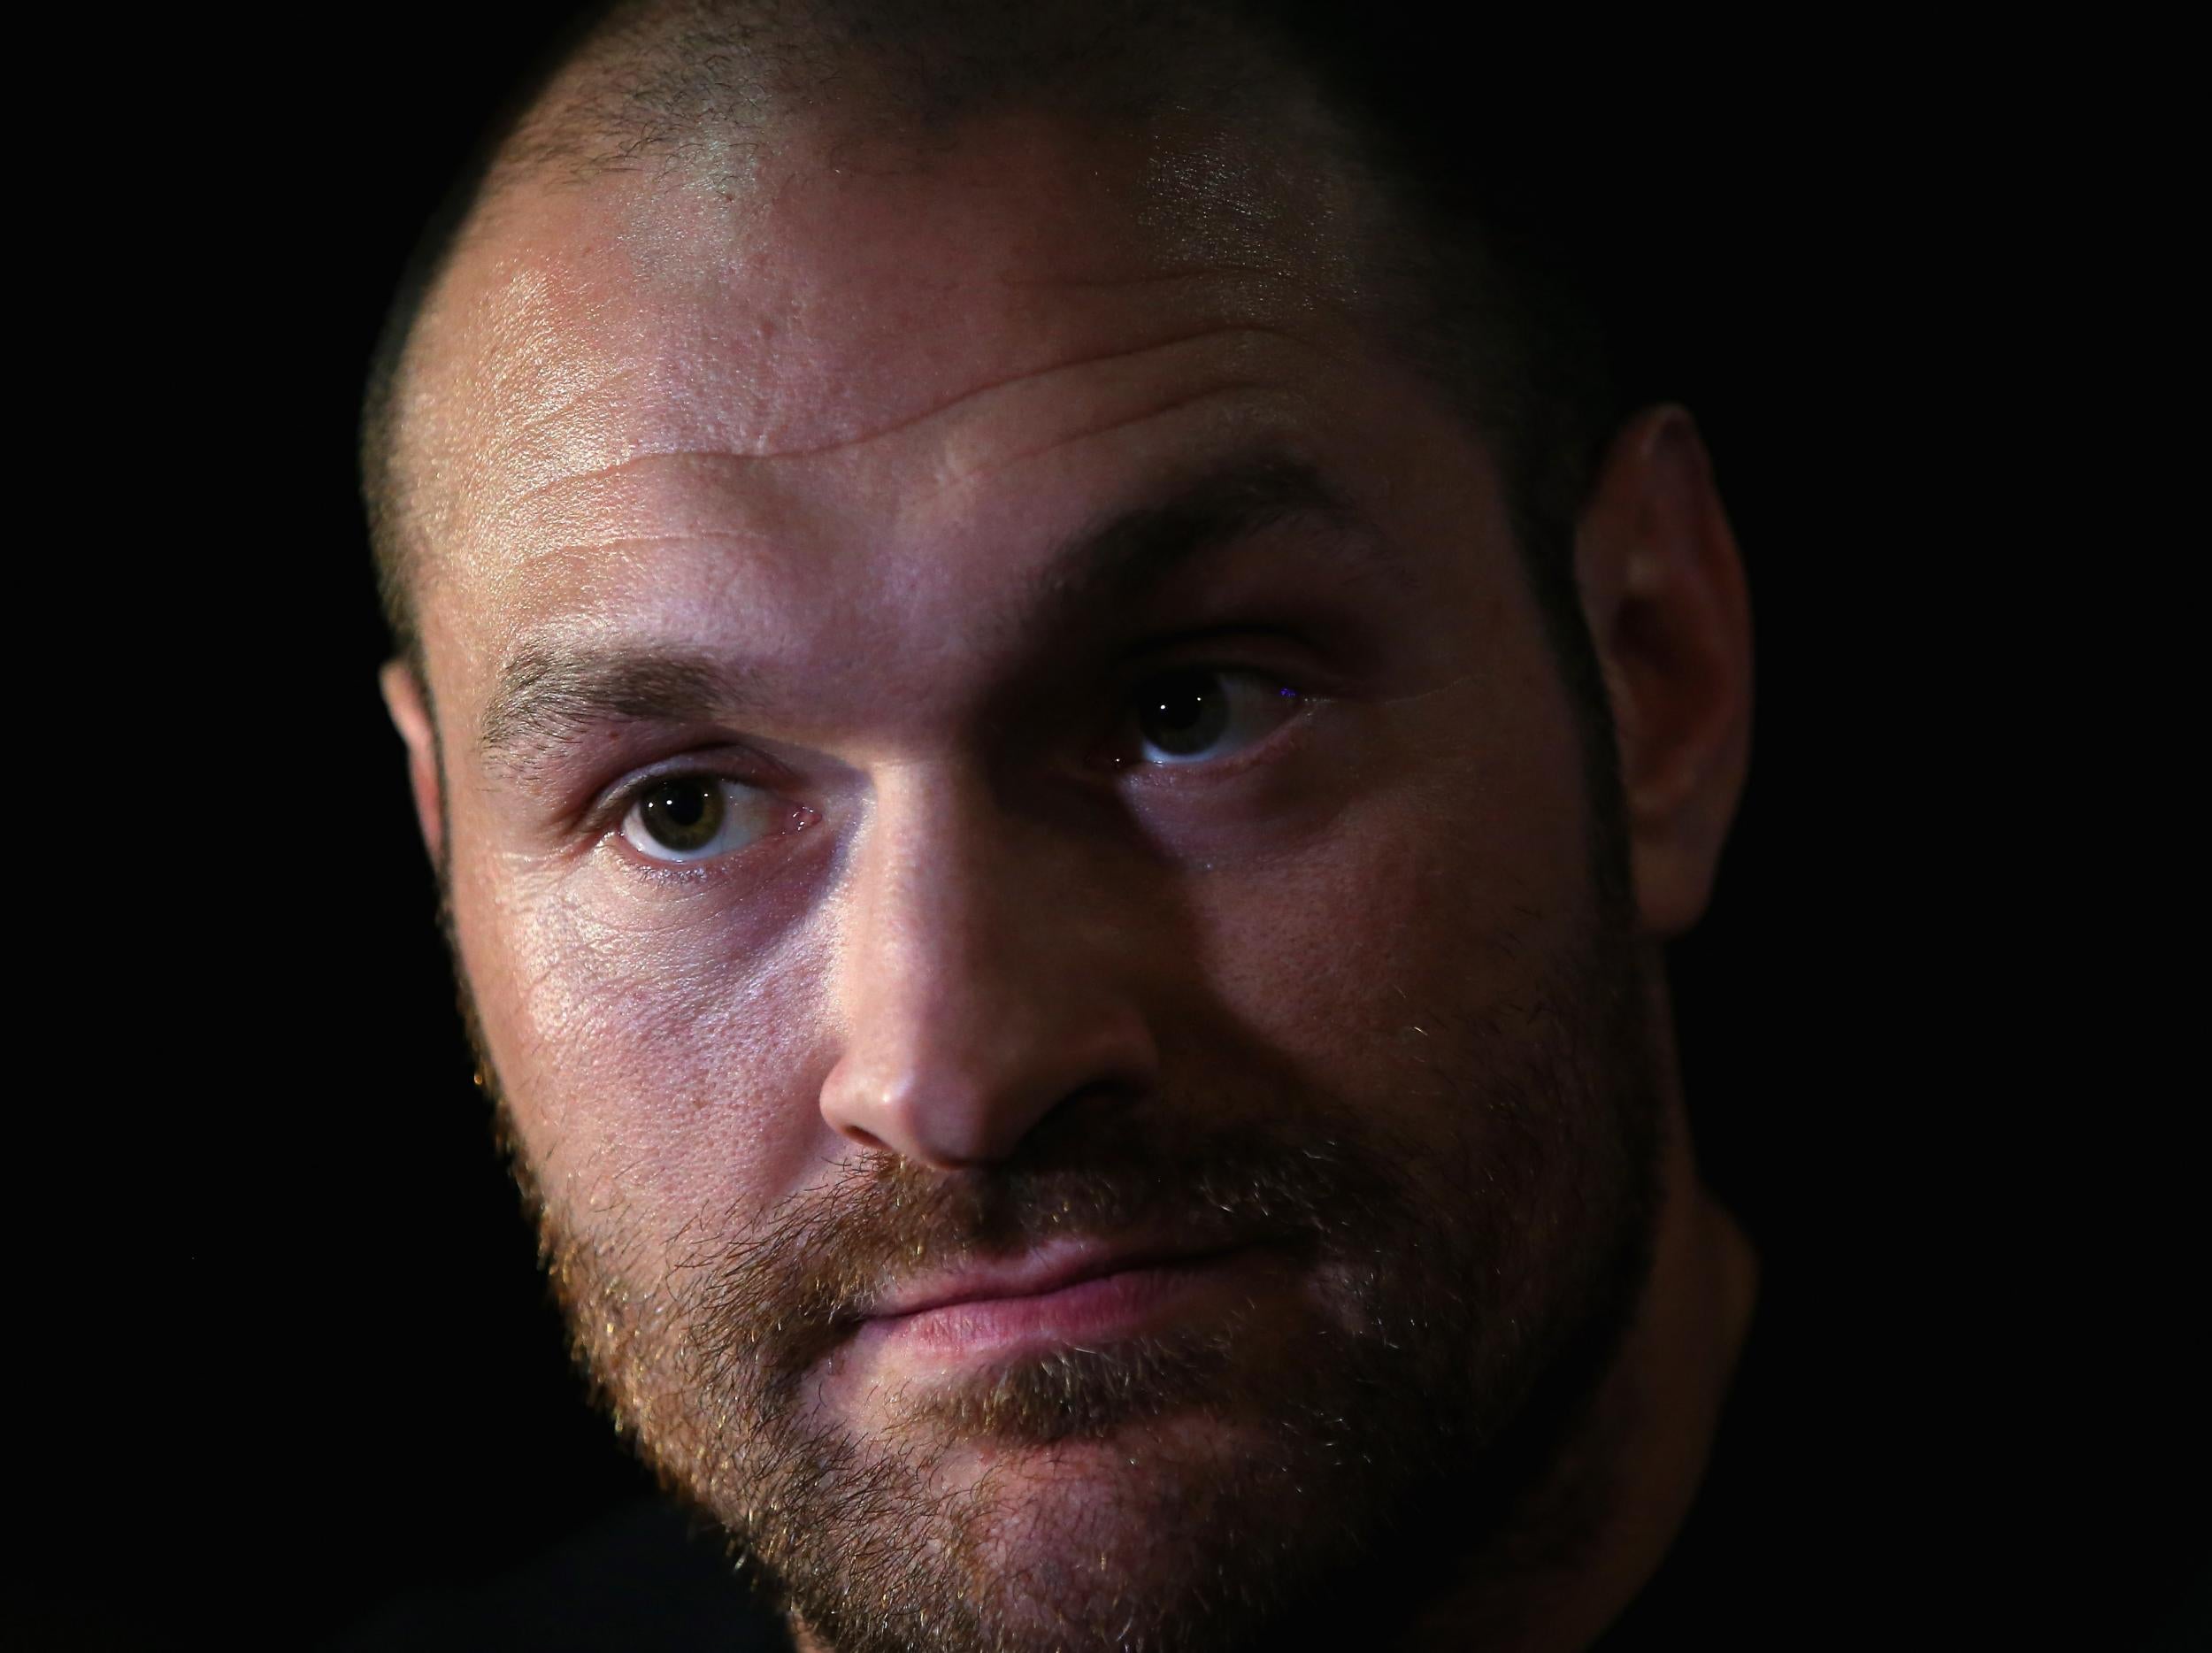 Tyson Fury won't be rushed back into the sport - though his overall goal remains reclaiming what was once his